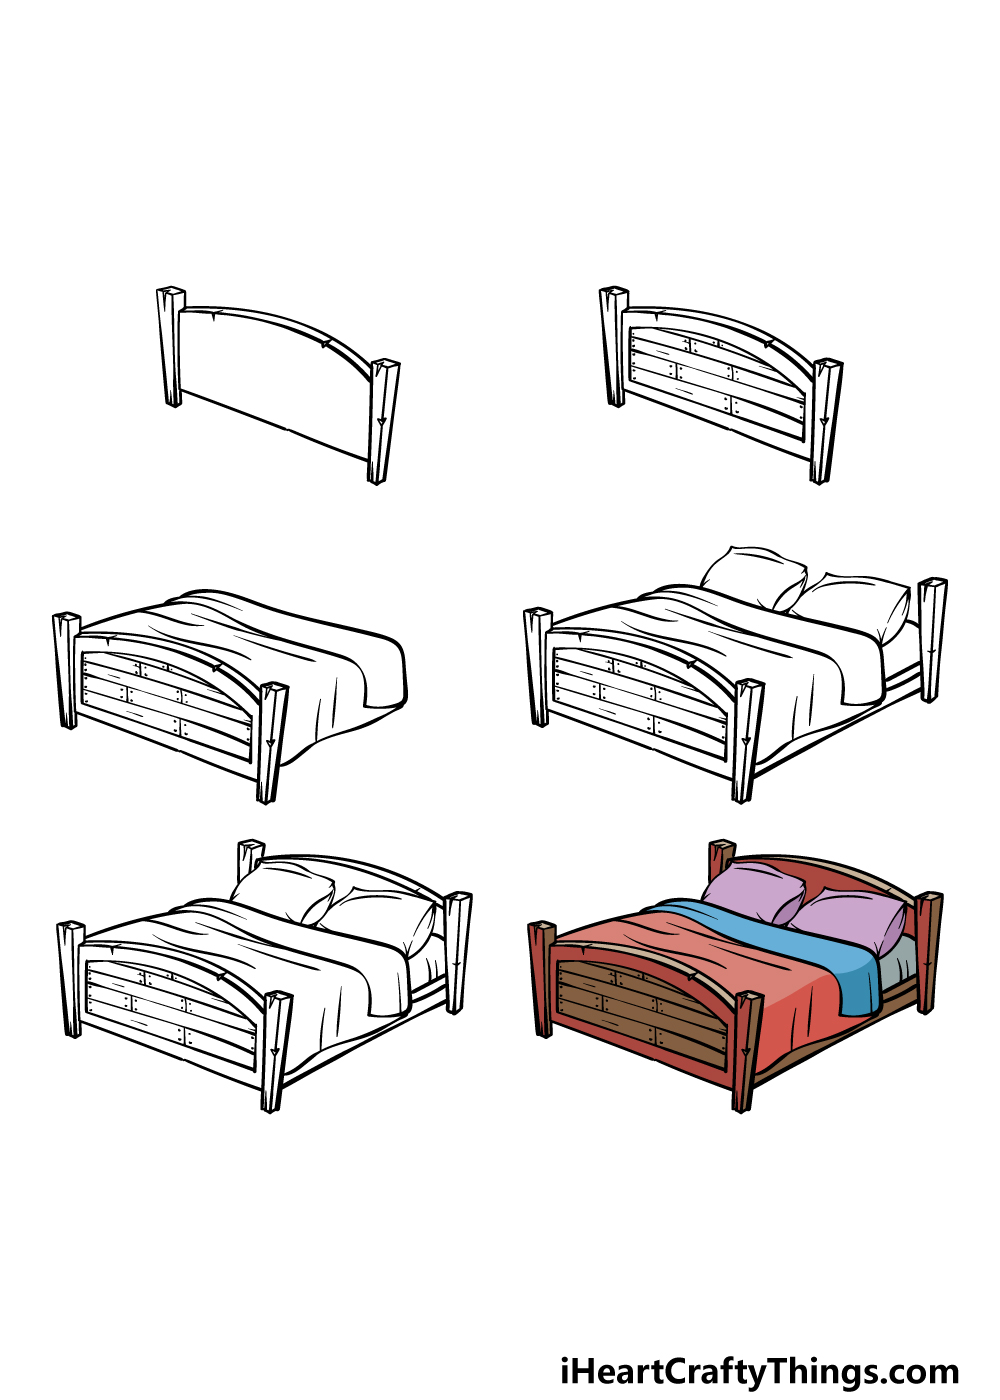 how to draw a bed in 6 steps